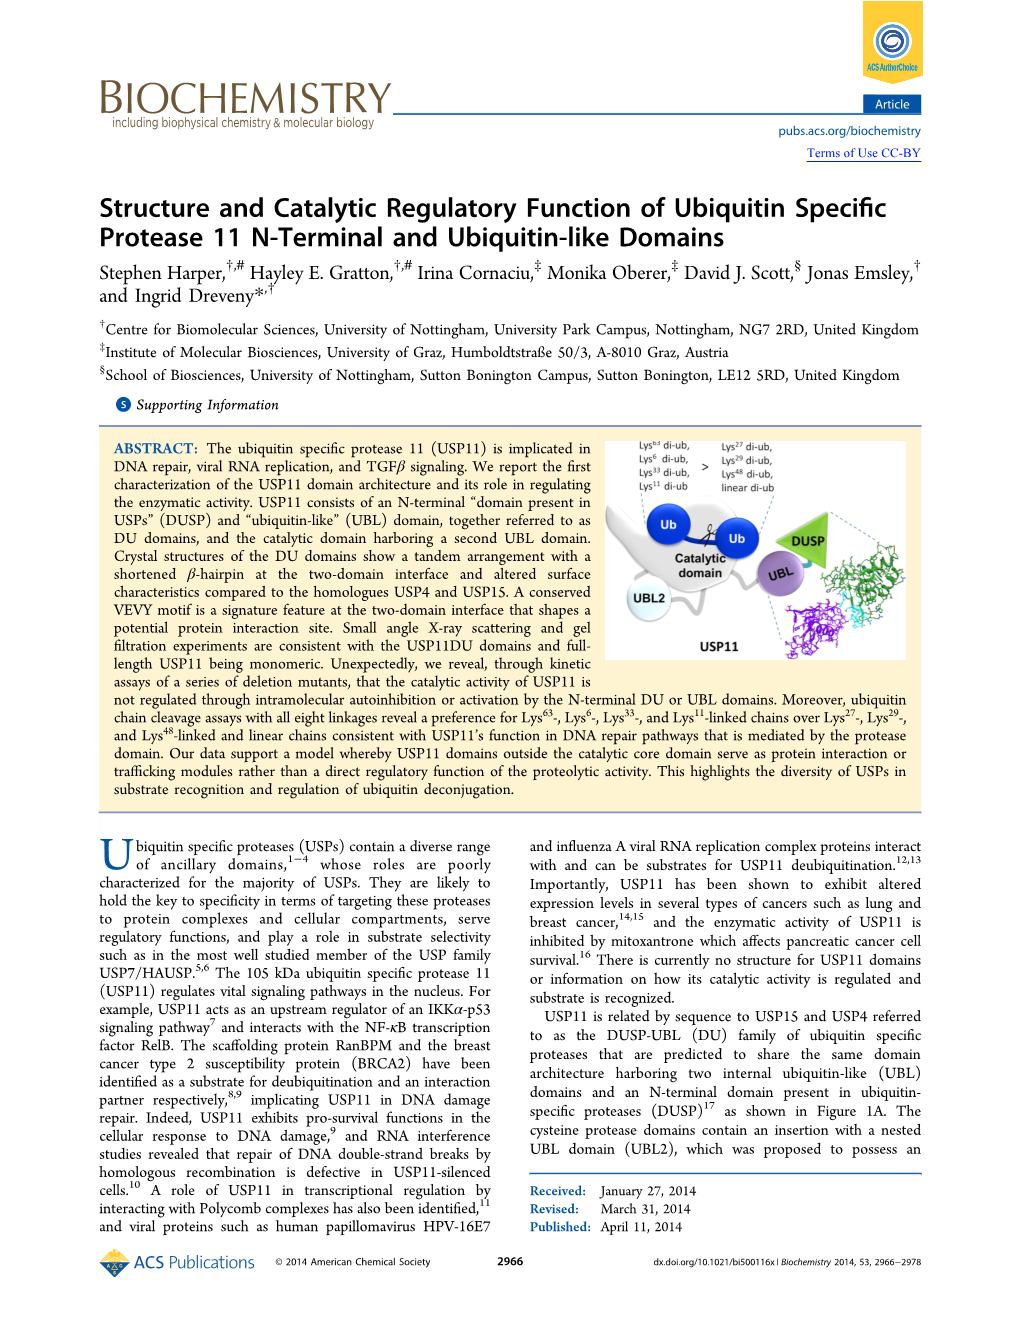 Structure and Catalytic Regulatory Function of Ubiquitin Specific